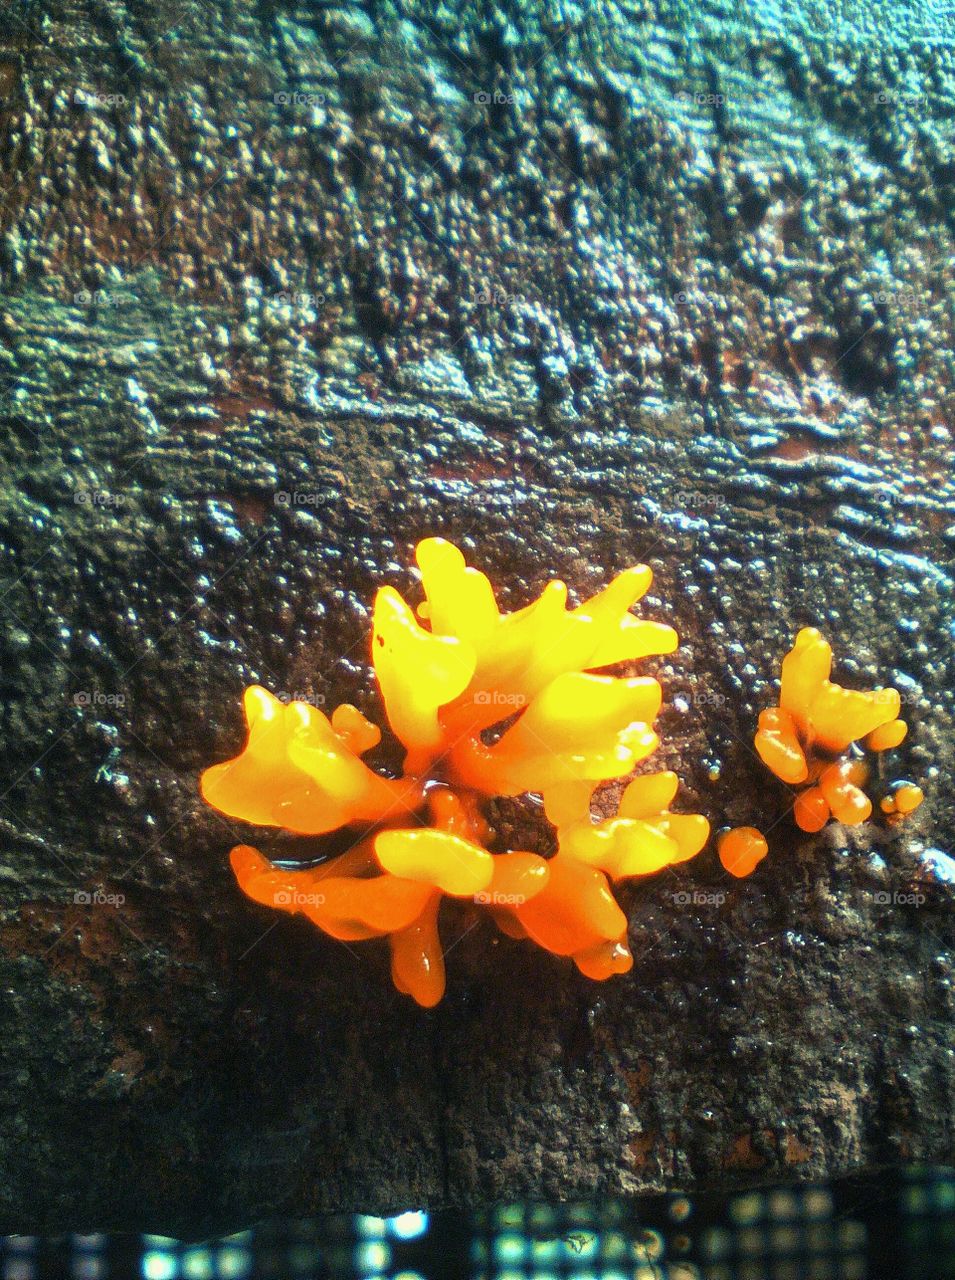 Yellow Fungus on wood, that's rarely half an inch